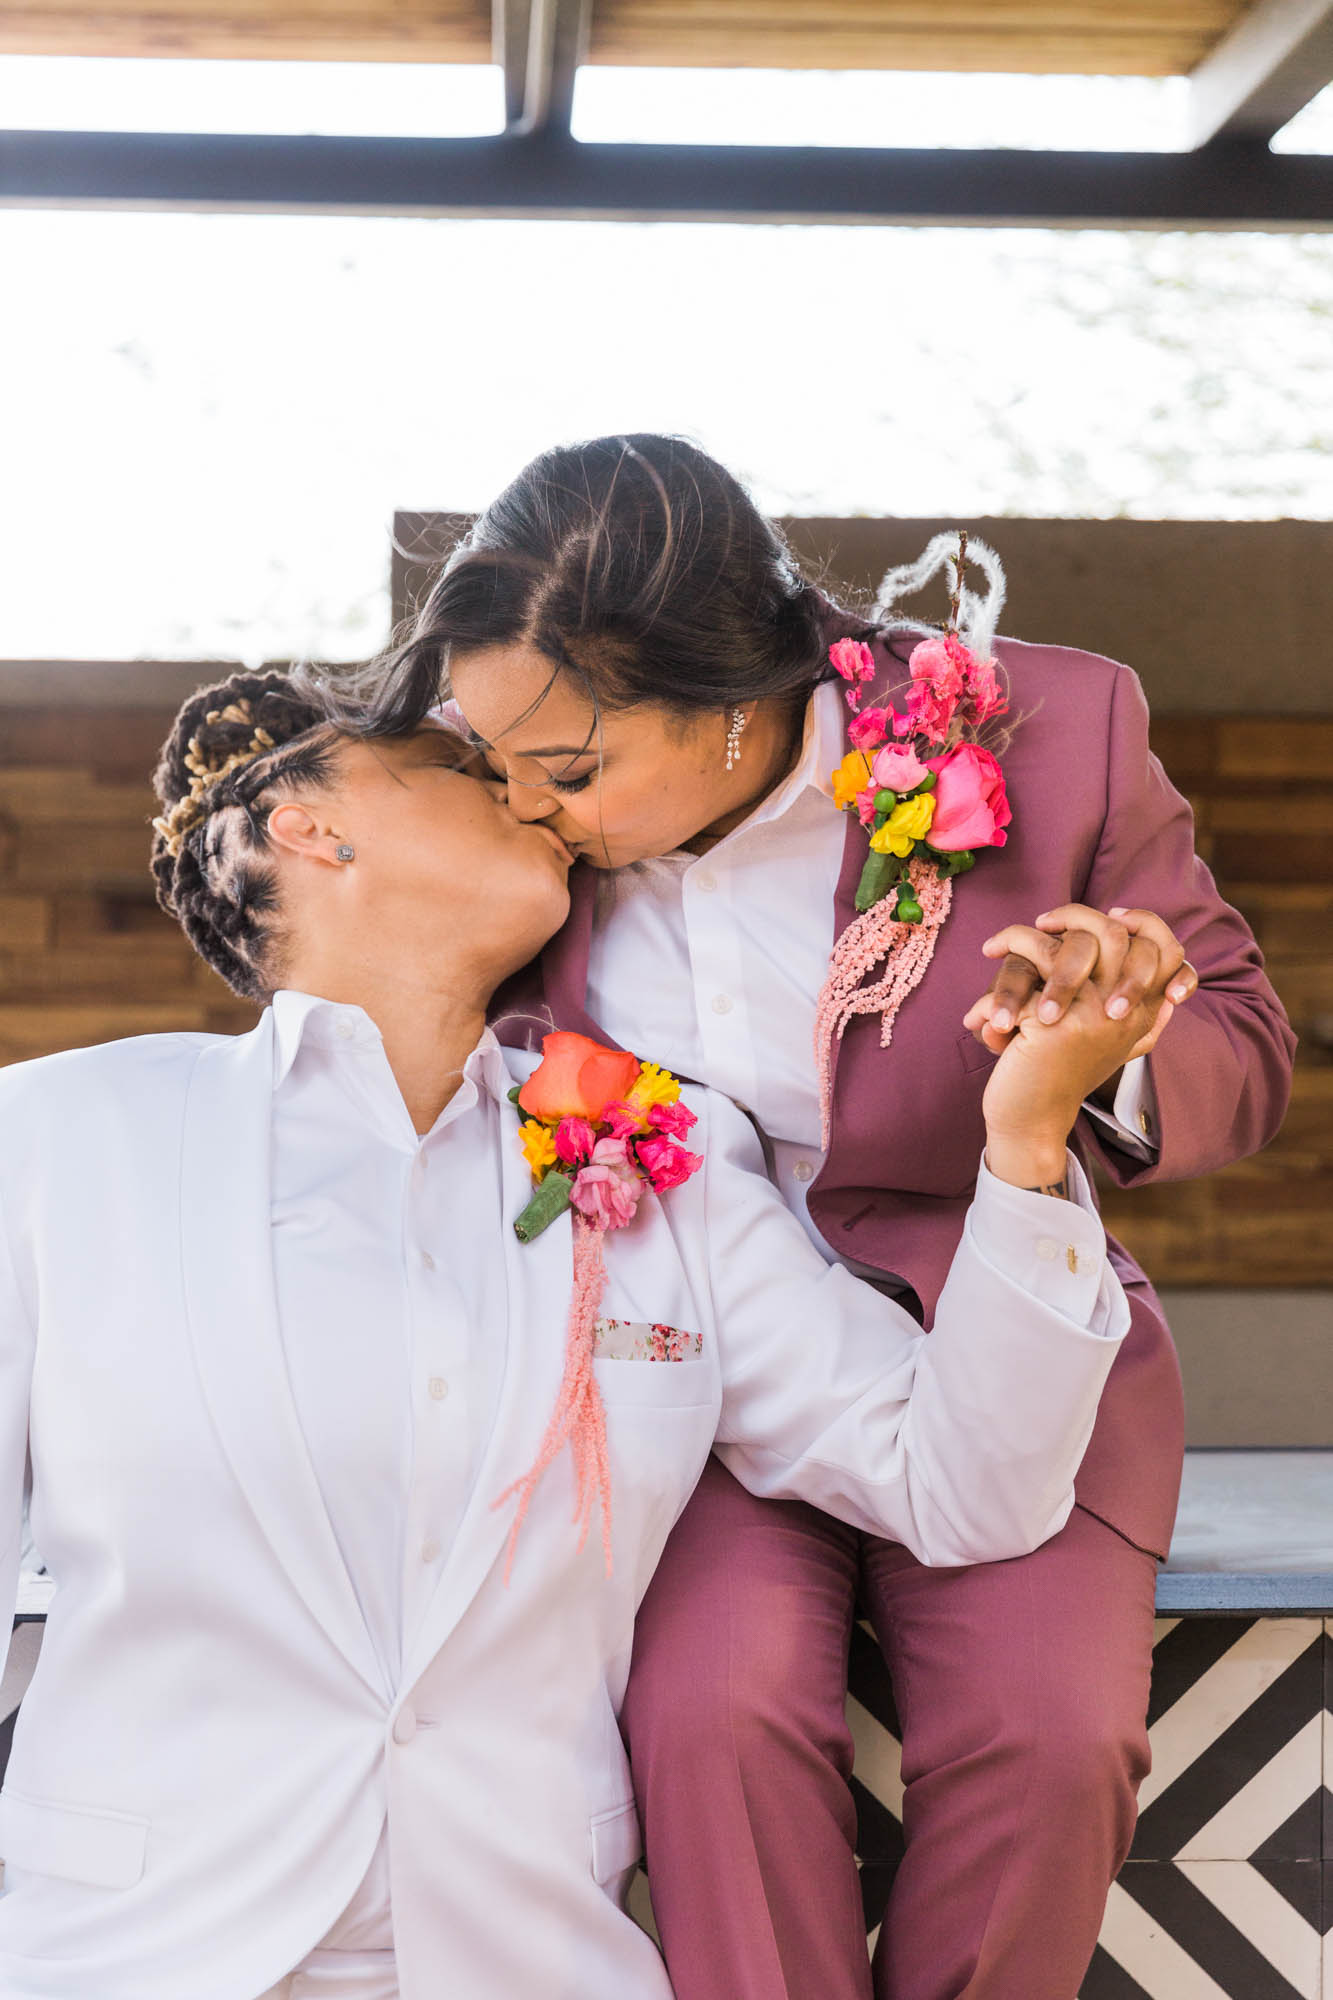 Bright and bold mid-century modern wedding ideas | Ashley LaPrade Photography | Featured on Equally Wed, the leading LGBTQ+ wedding magazine